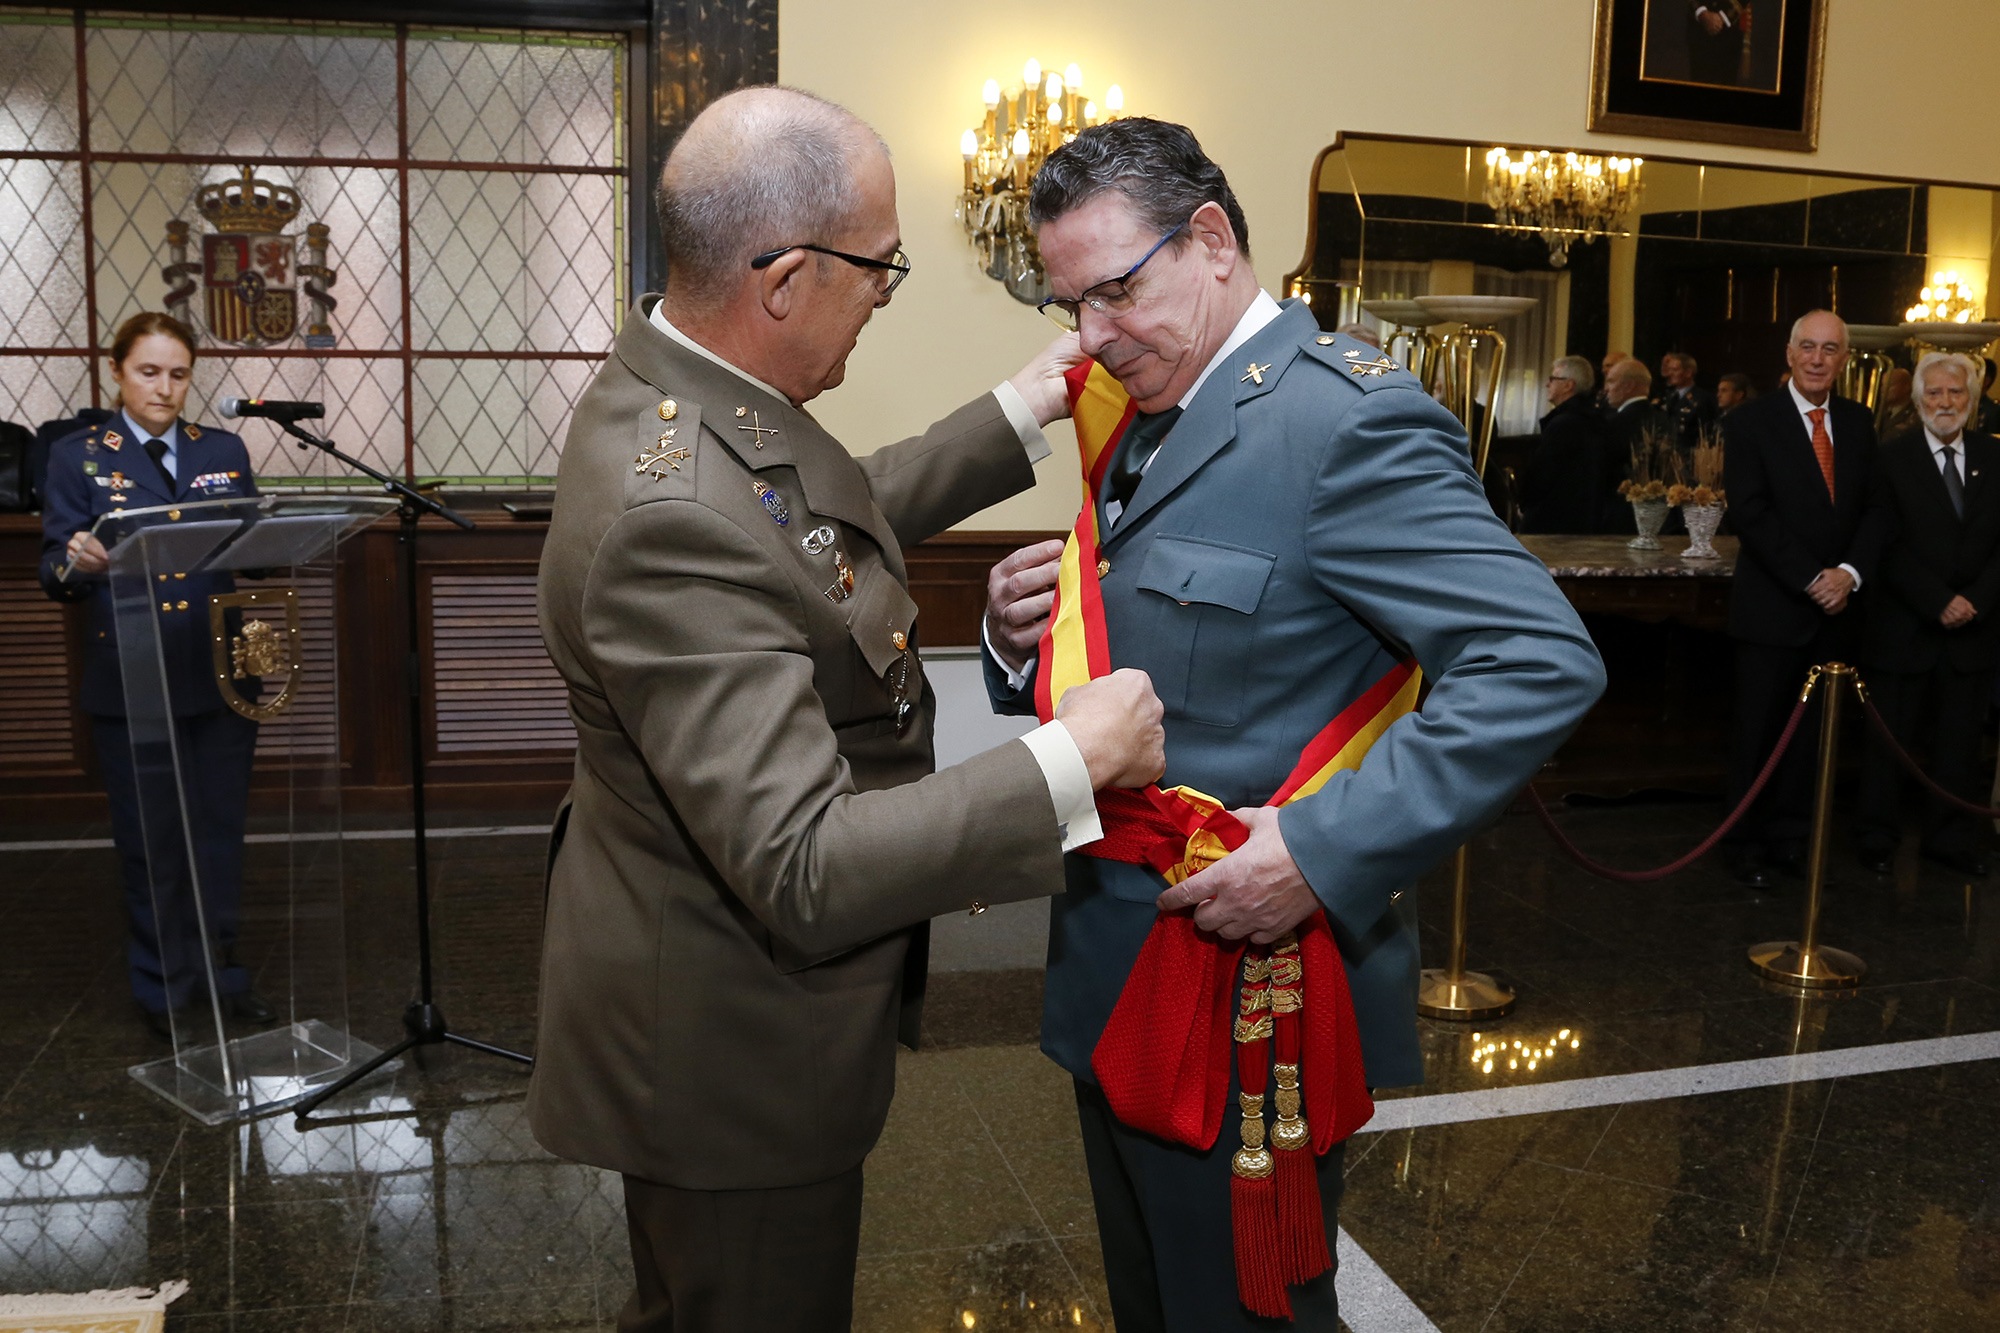 JEMAD awards the Grand Cross of Naval Merit to the Deputy Operational Director of the Spanish Civil Guard